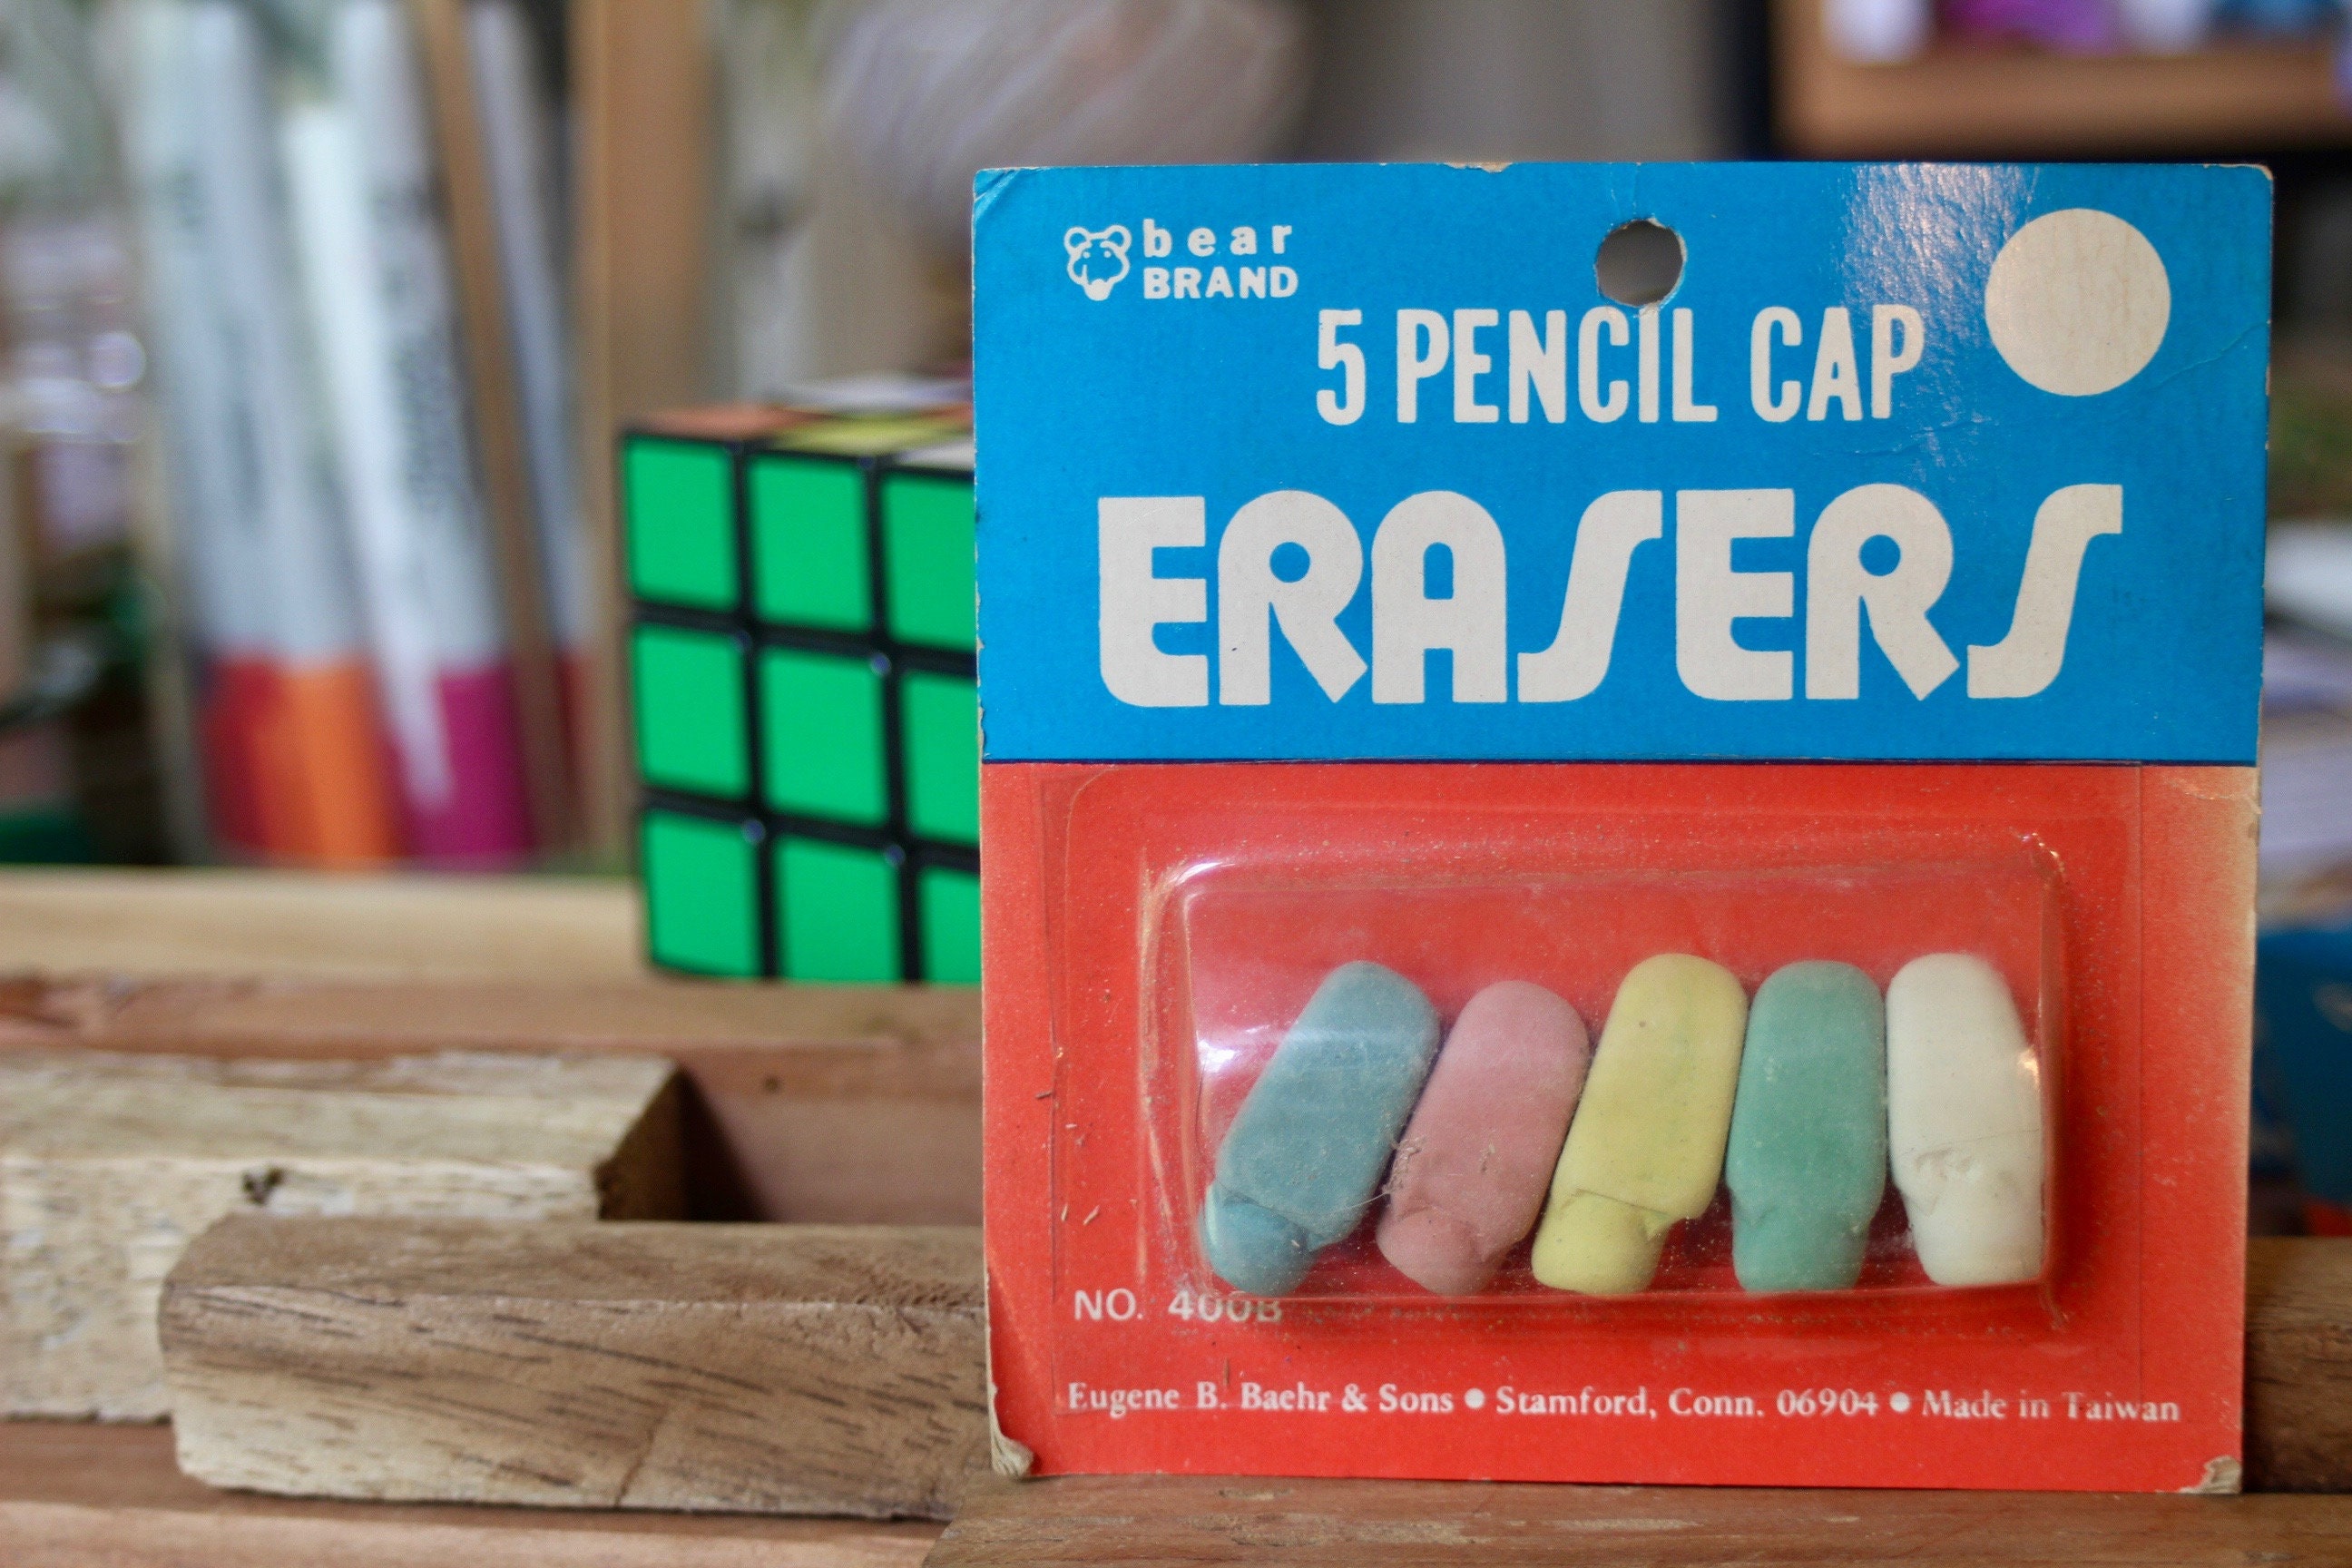 Vintage Circa 1970's A.W. Faber-castell Erasers, No.7011 Medium Parapink  Lot of 10 Old Stock in Box 